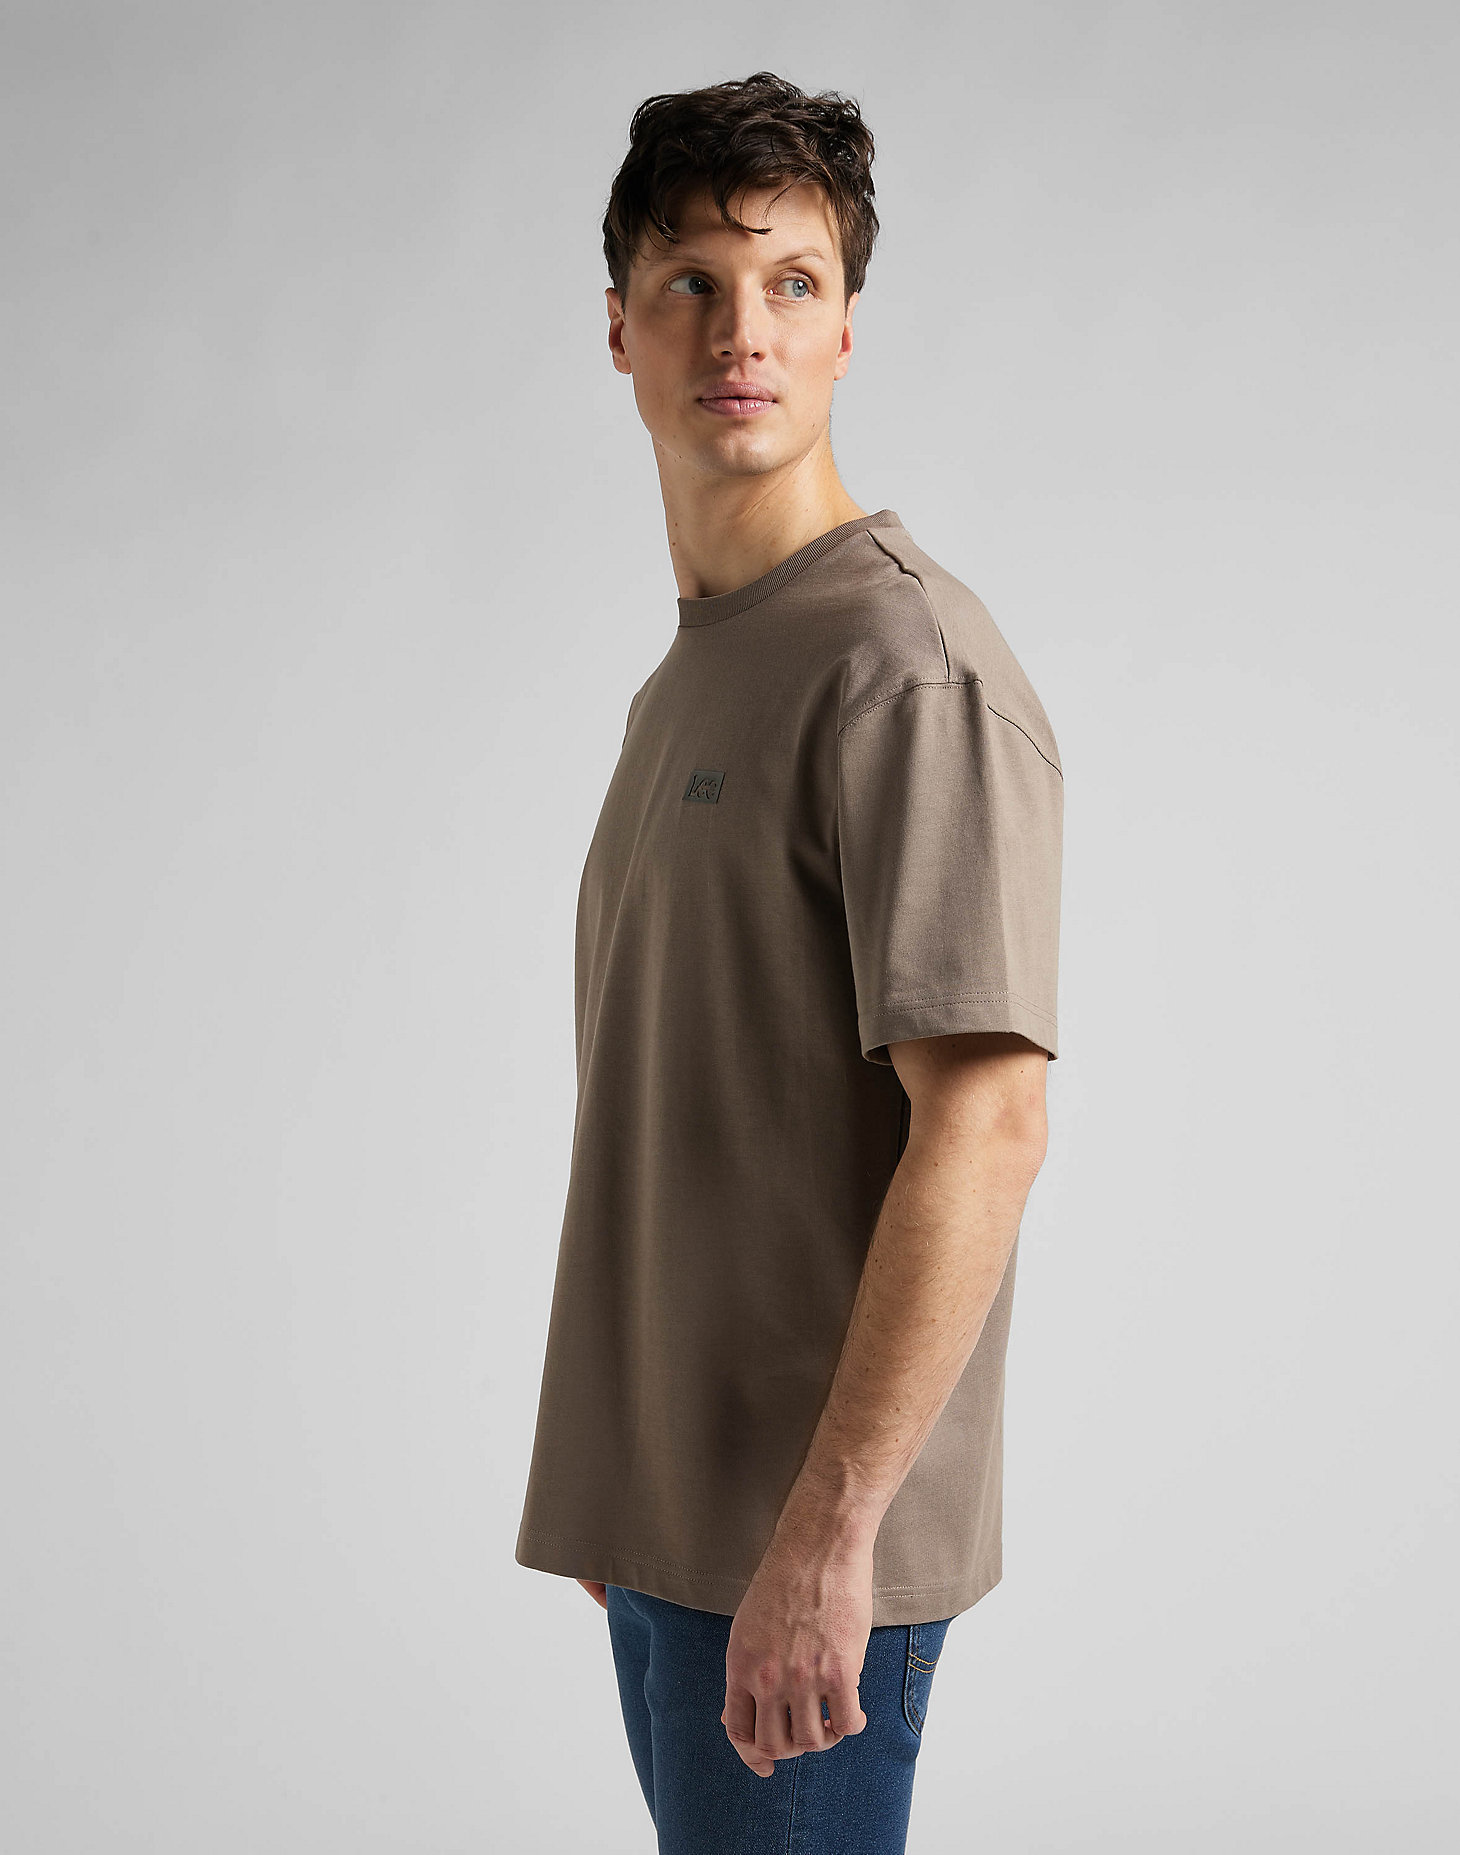 Core Loose Tee in Mid Stone alternative view 3